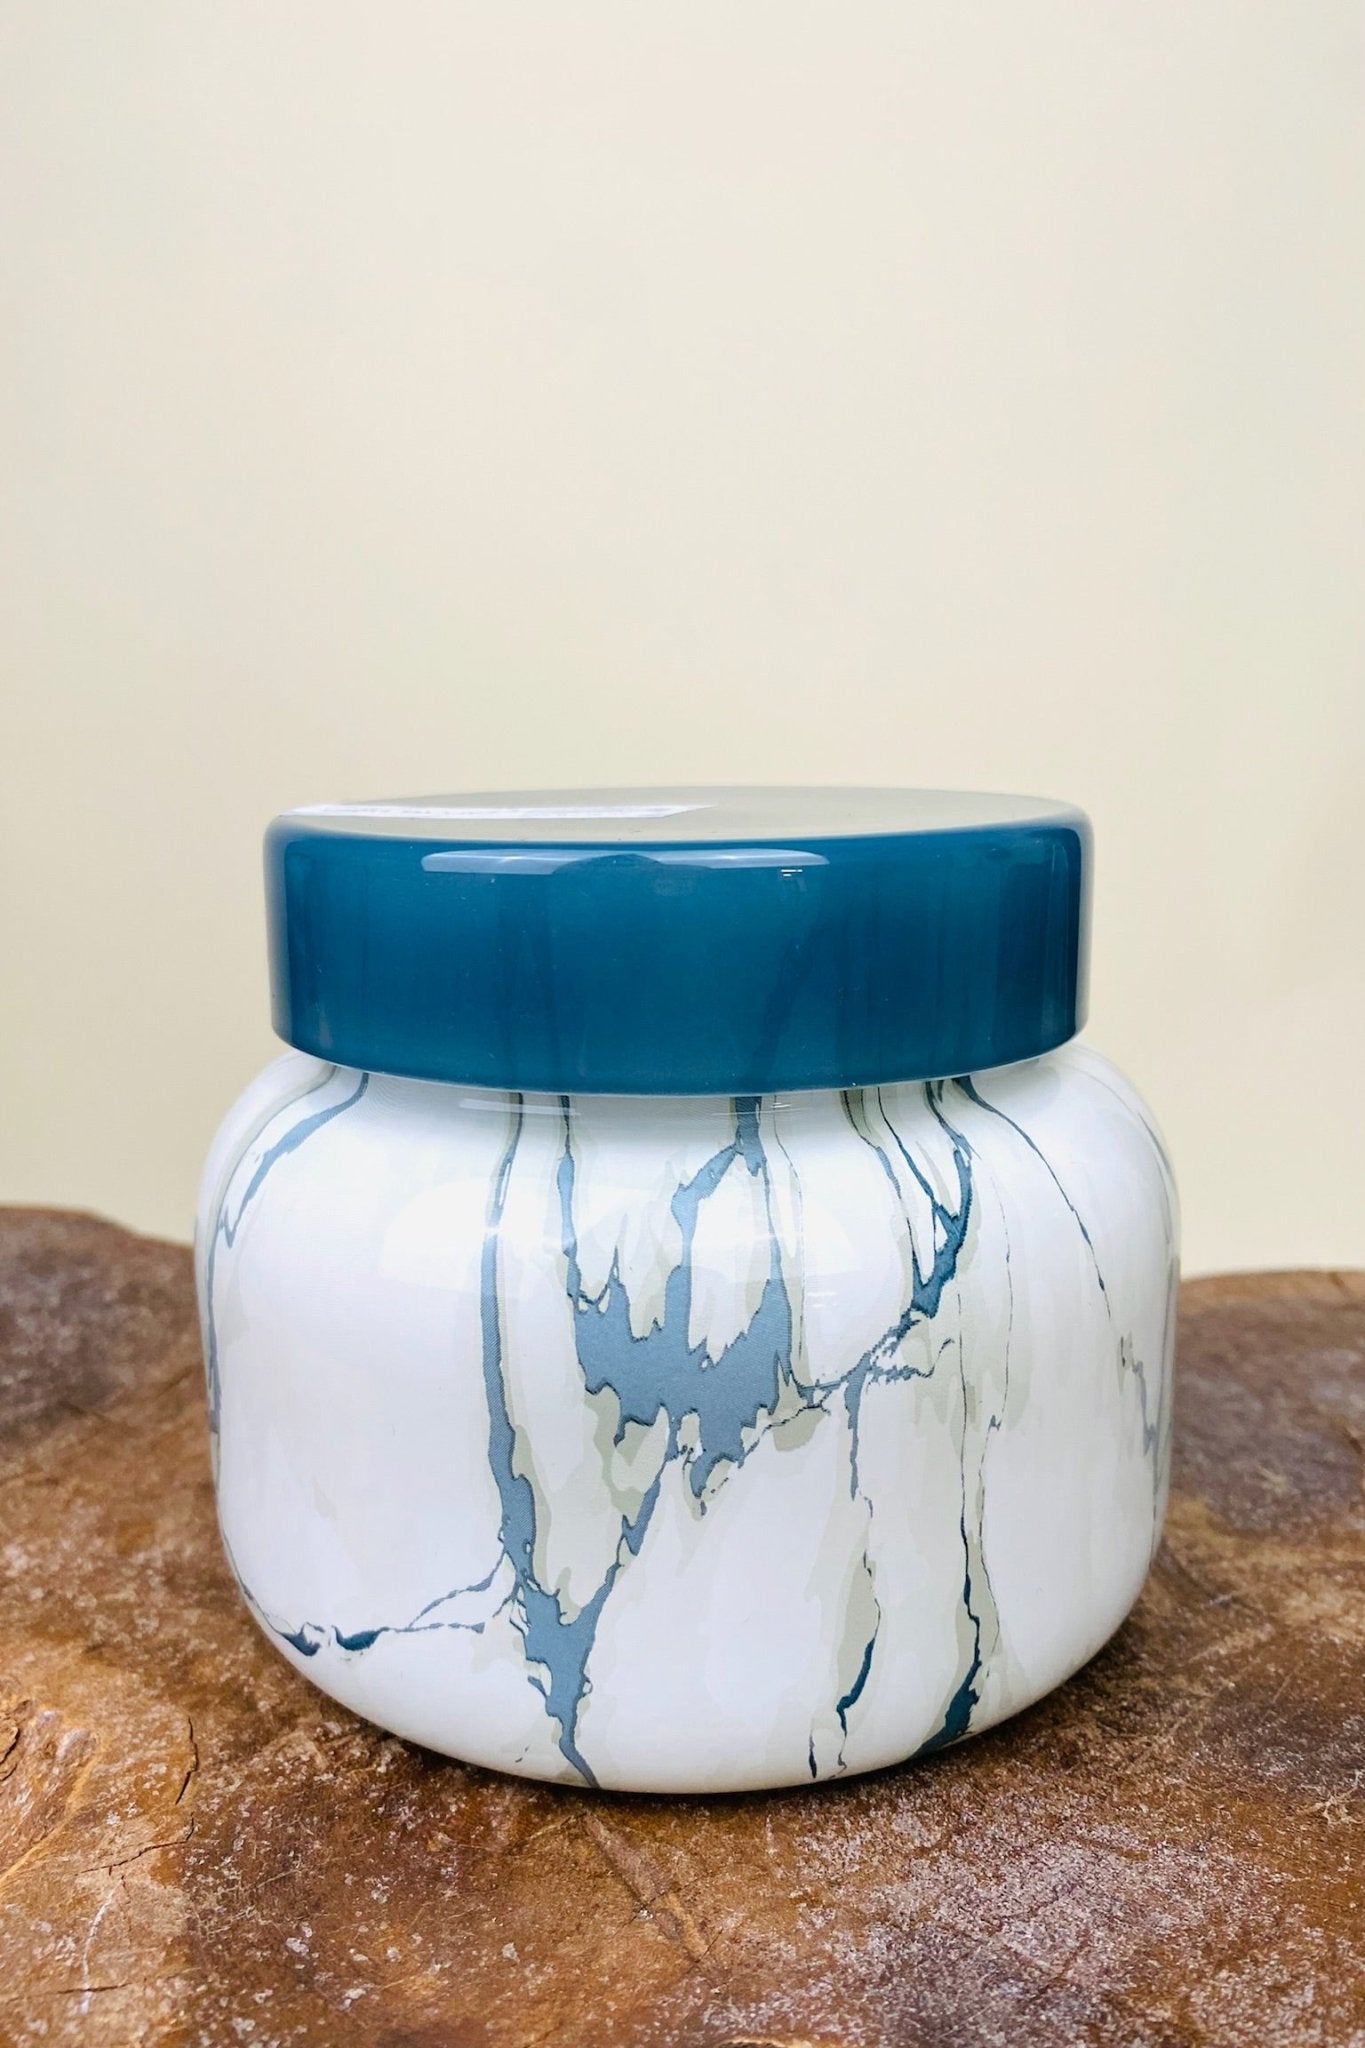 Capri Blue volcano scent 19oz candle mod marble - Trendy Candles and Scents at Lush Fashion Lounge Boutique in Oklahoma City